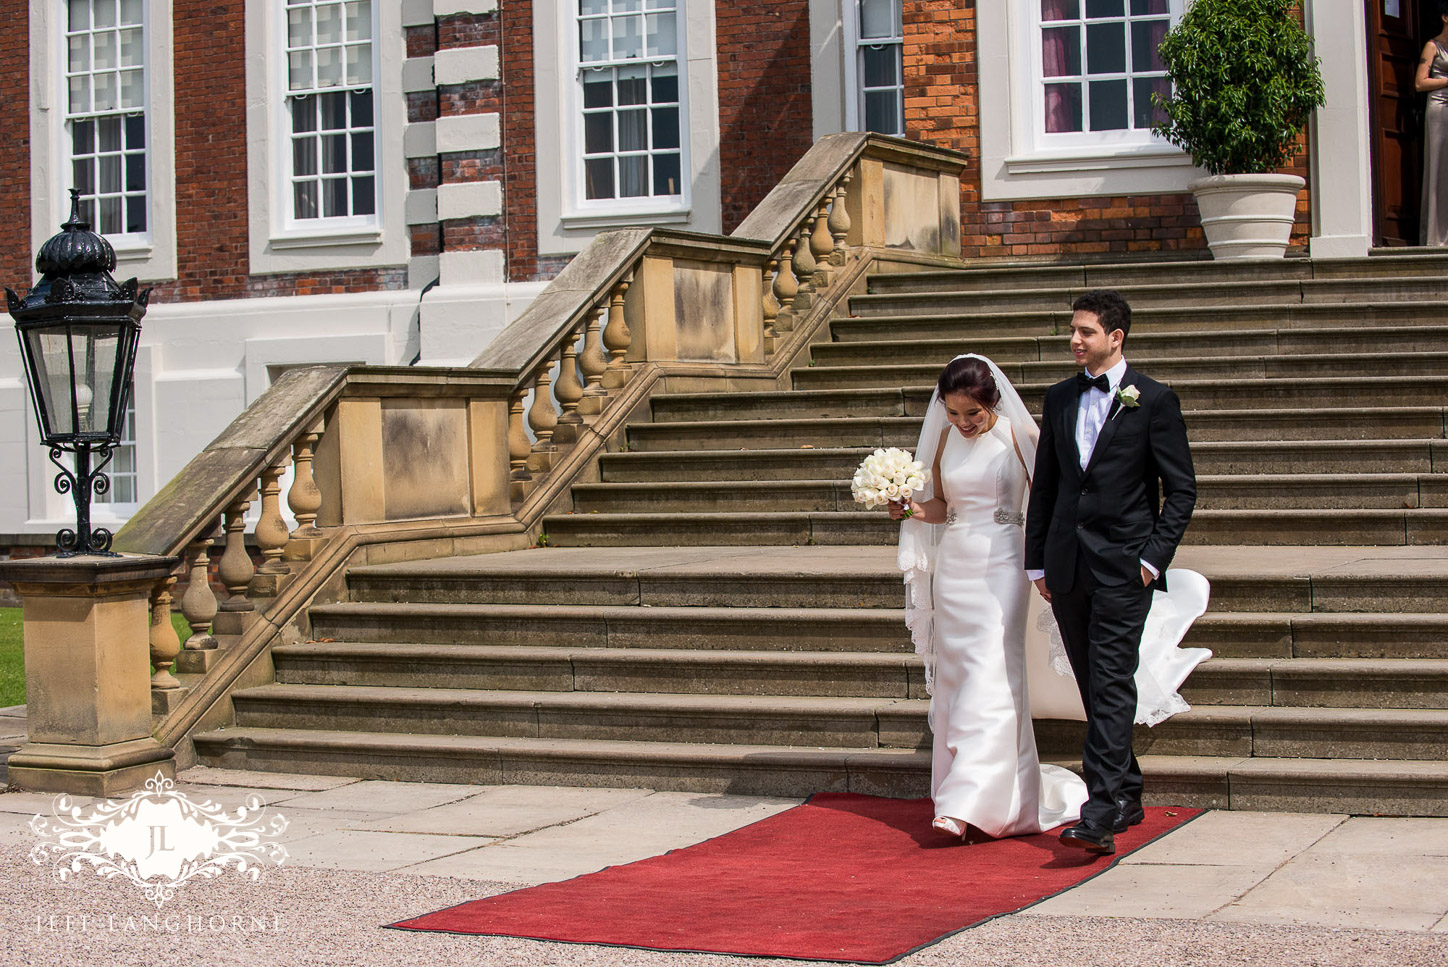 Wedding photography in liverpool